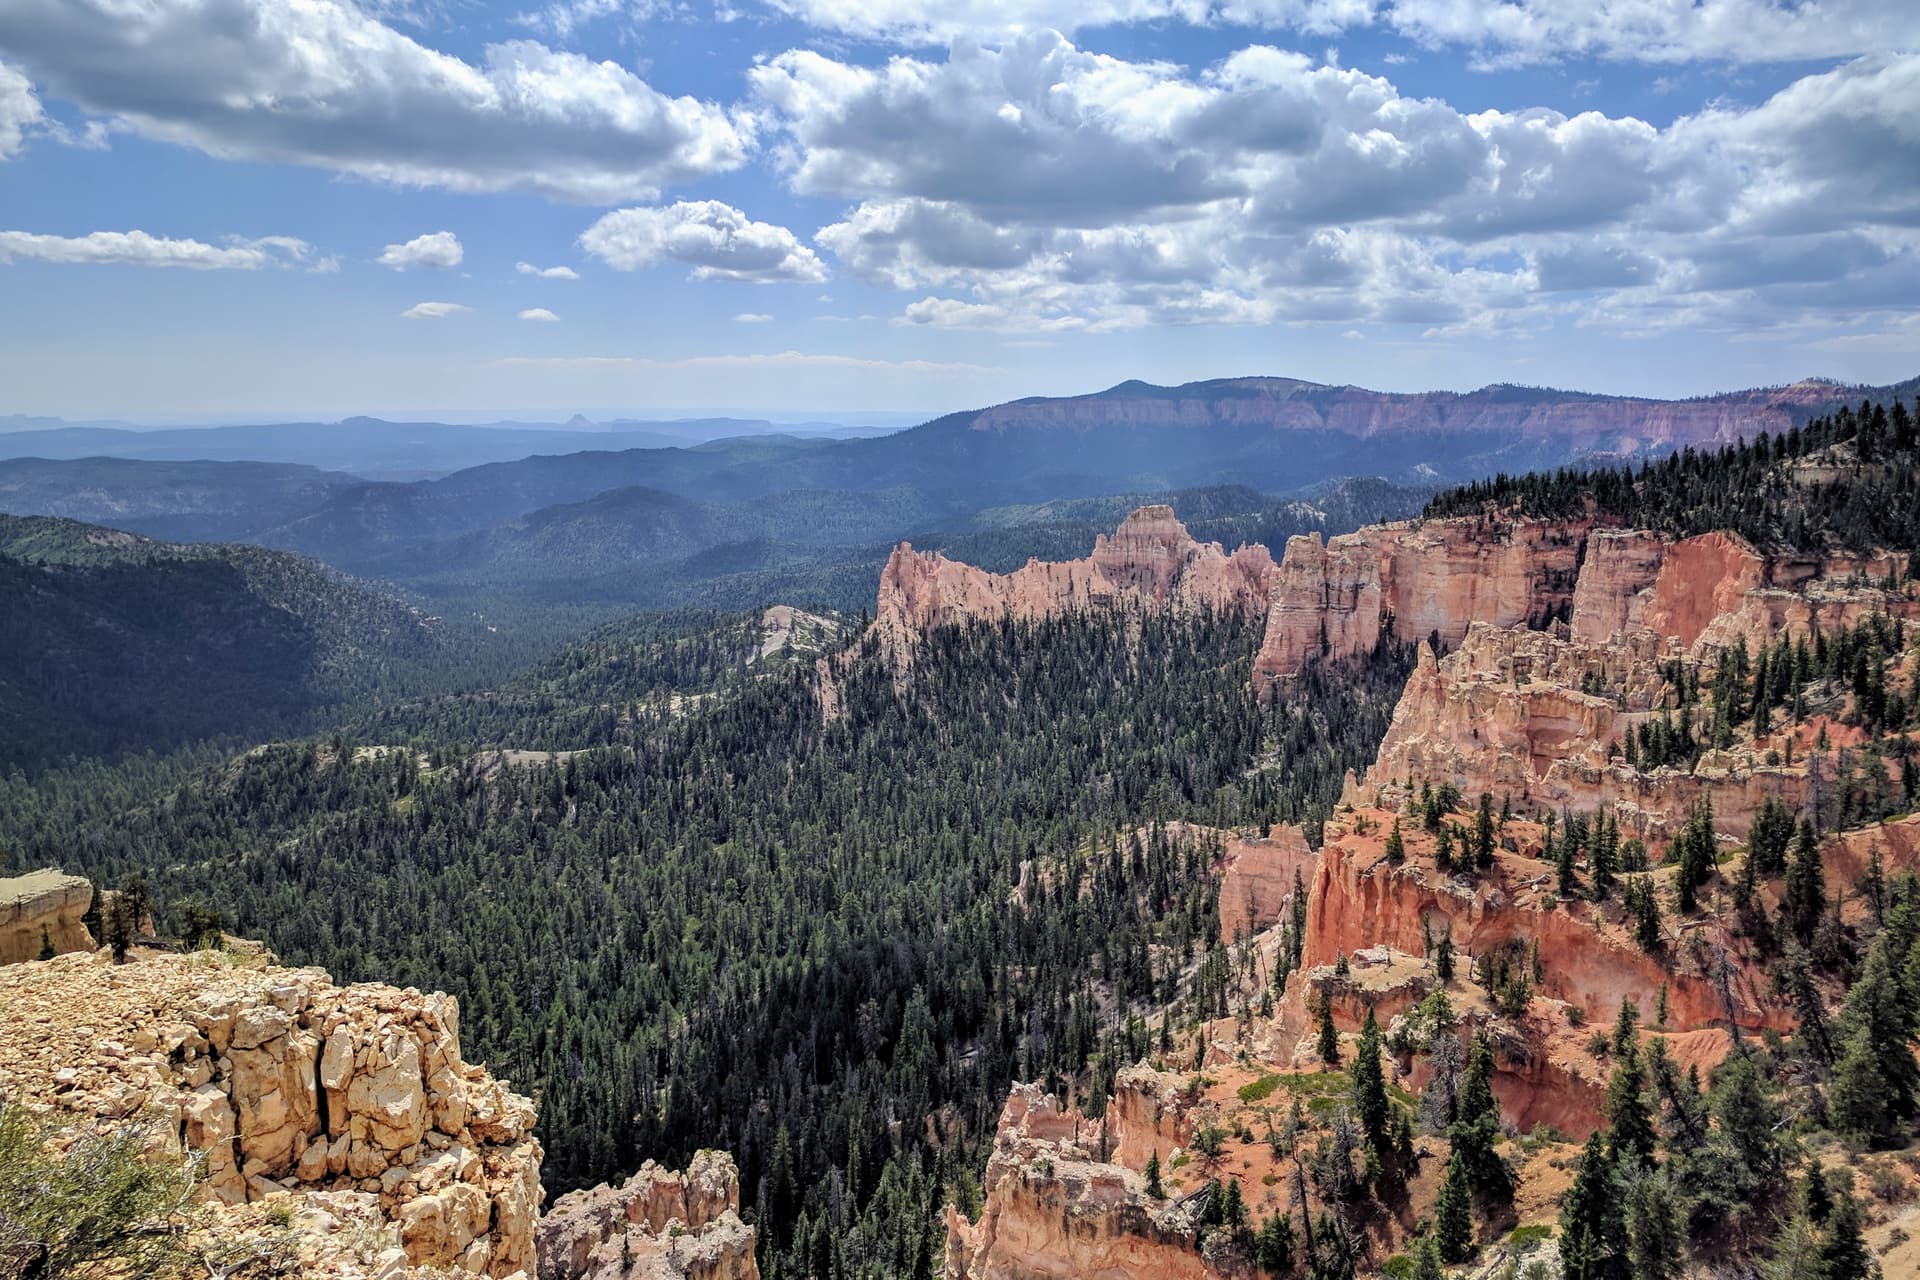 A fin of soft red and white rock extends from the South Wall of Bryce Canyon. The fin is quickly reduced to a series of pillars, and then a low, pine tree covered ridge that can be seen to extend some distance into the forest below.